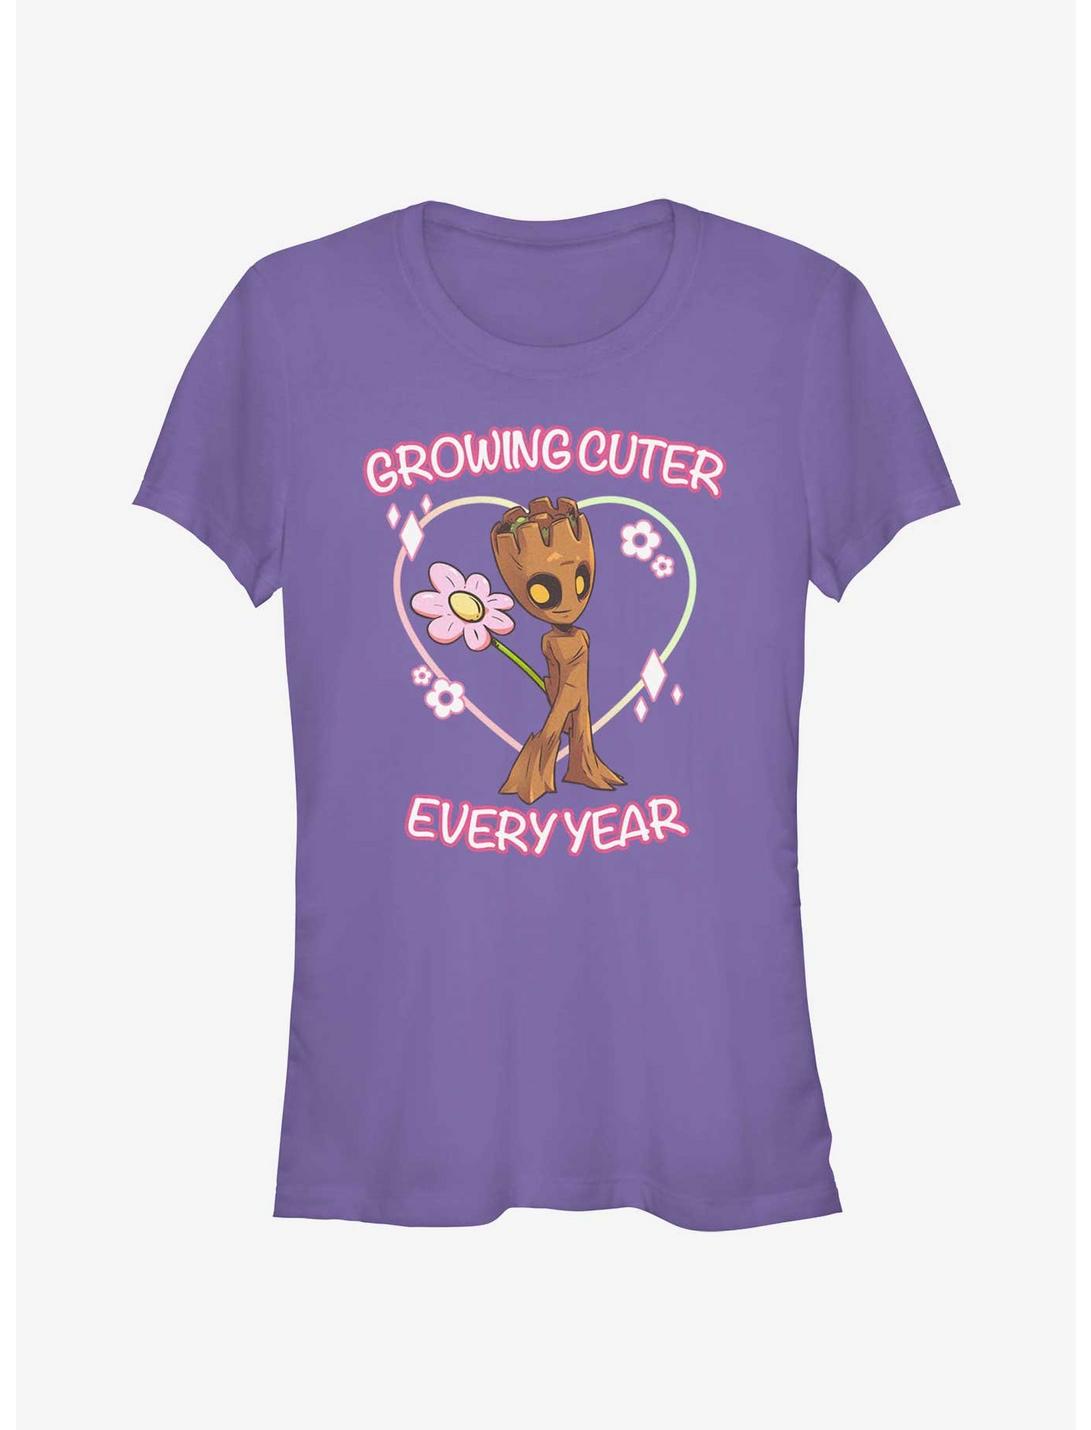 Marvel Guardians of the Galaxy Groot Growing Cuter Every Year Girls T-Shirt, PURPLE, hi-res